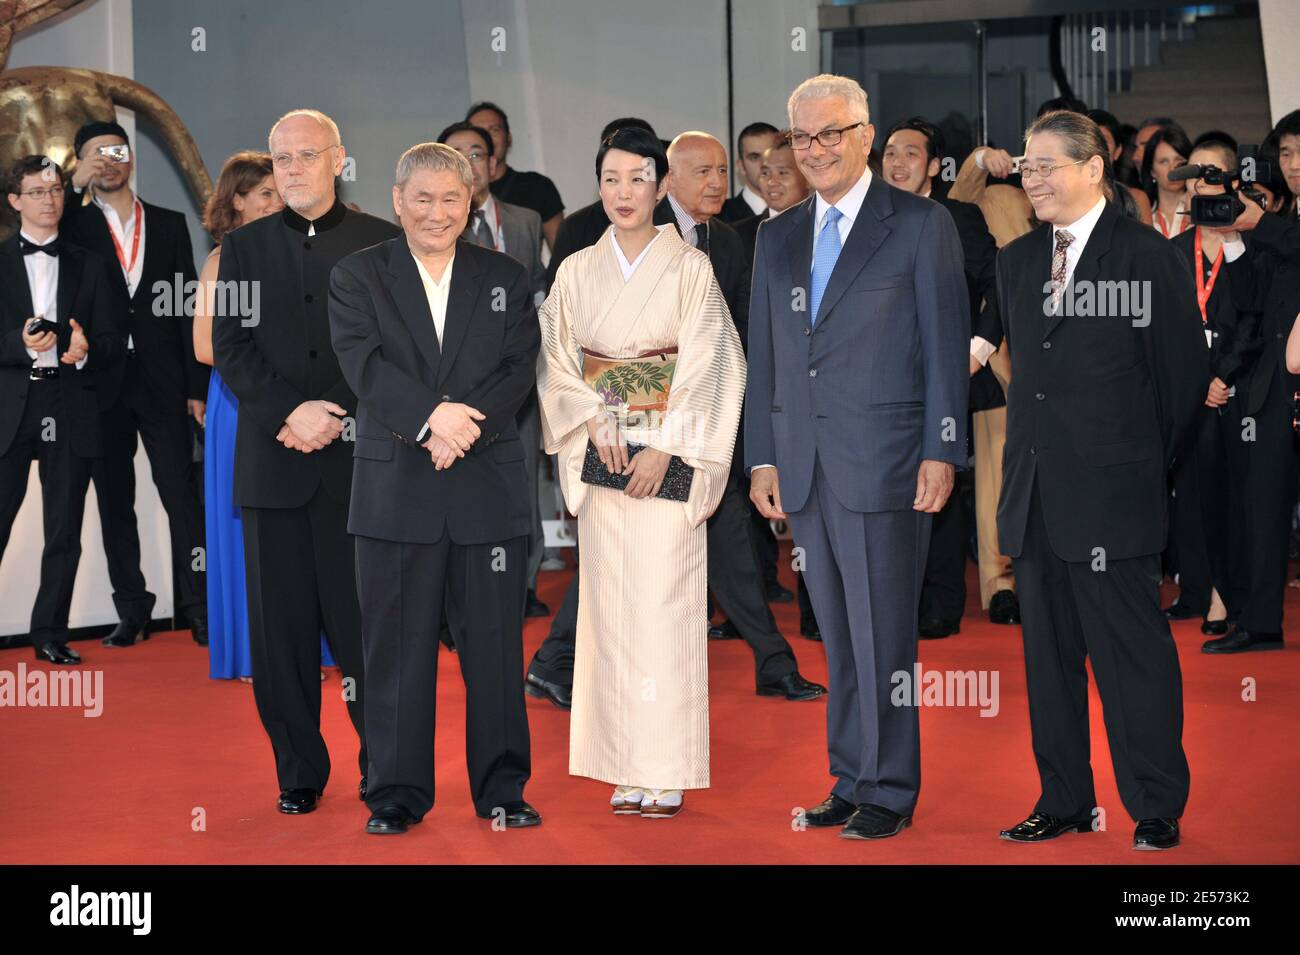 Marco Muller, Actress Kanako Higuchi, director Takeshi Kitano, Paolo Barratta, and producer Masayuki Mori arrive at the 'Achilles and the Tortoise' screening during the 65th Mostra Venice Film Festival at Sala Grande in Venice, Italy on August 28, 2008. Photo by Thierry Orban/ABACAPRESS.COM Stock Photo